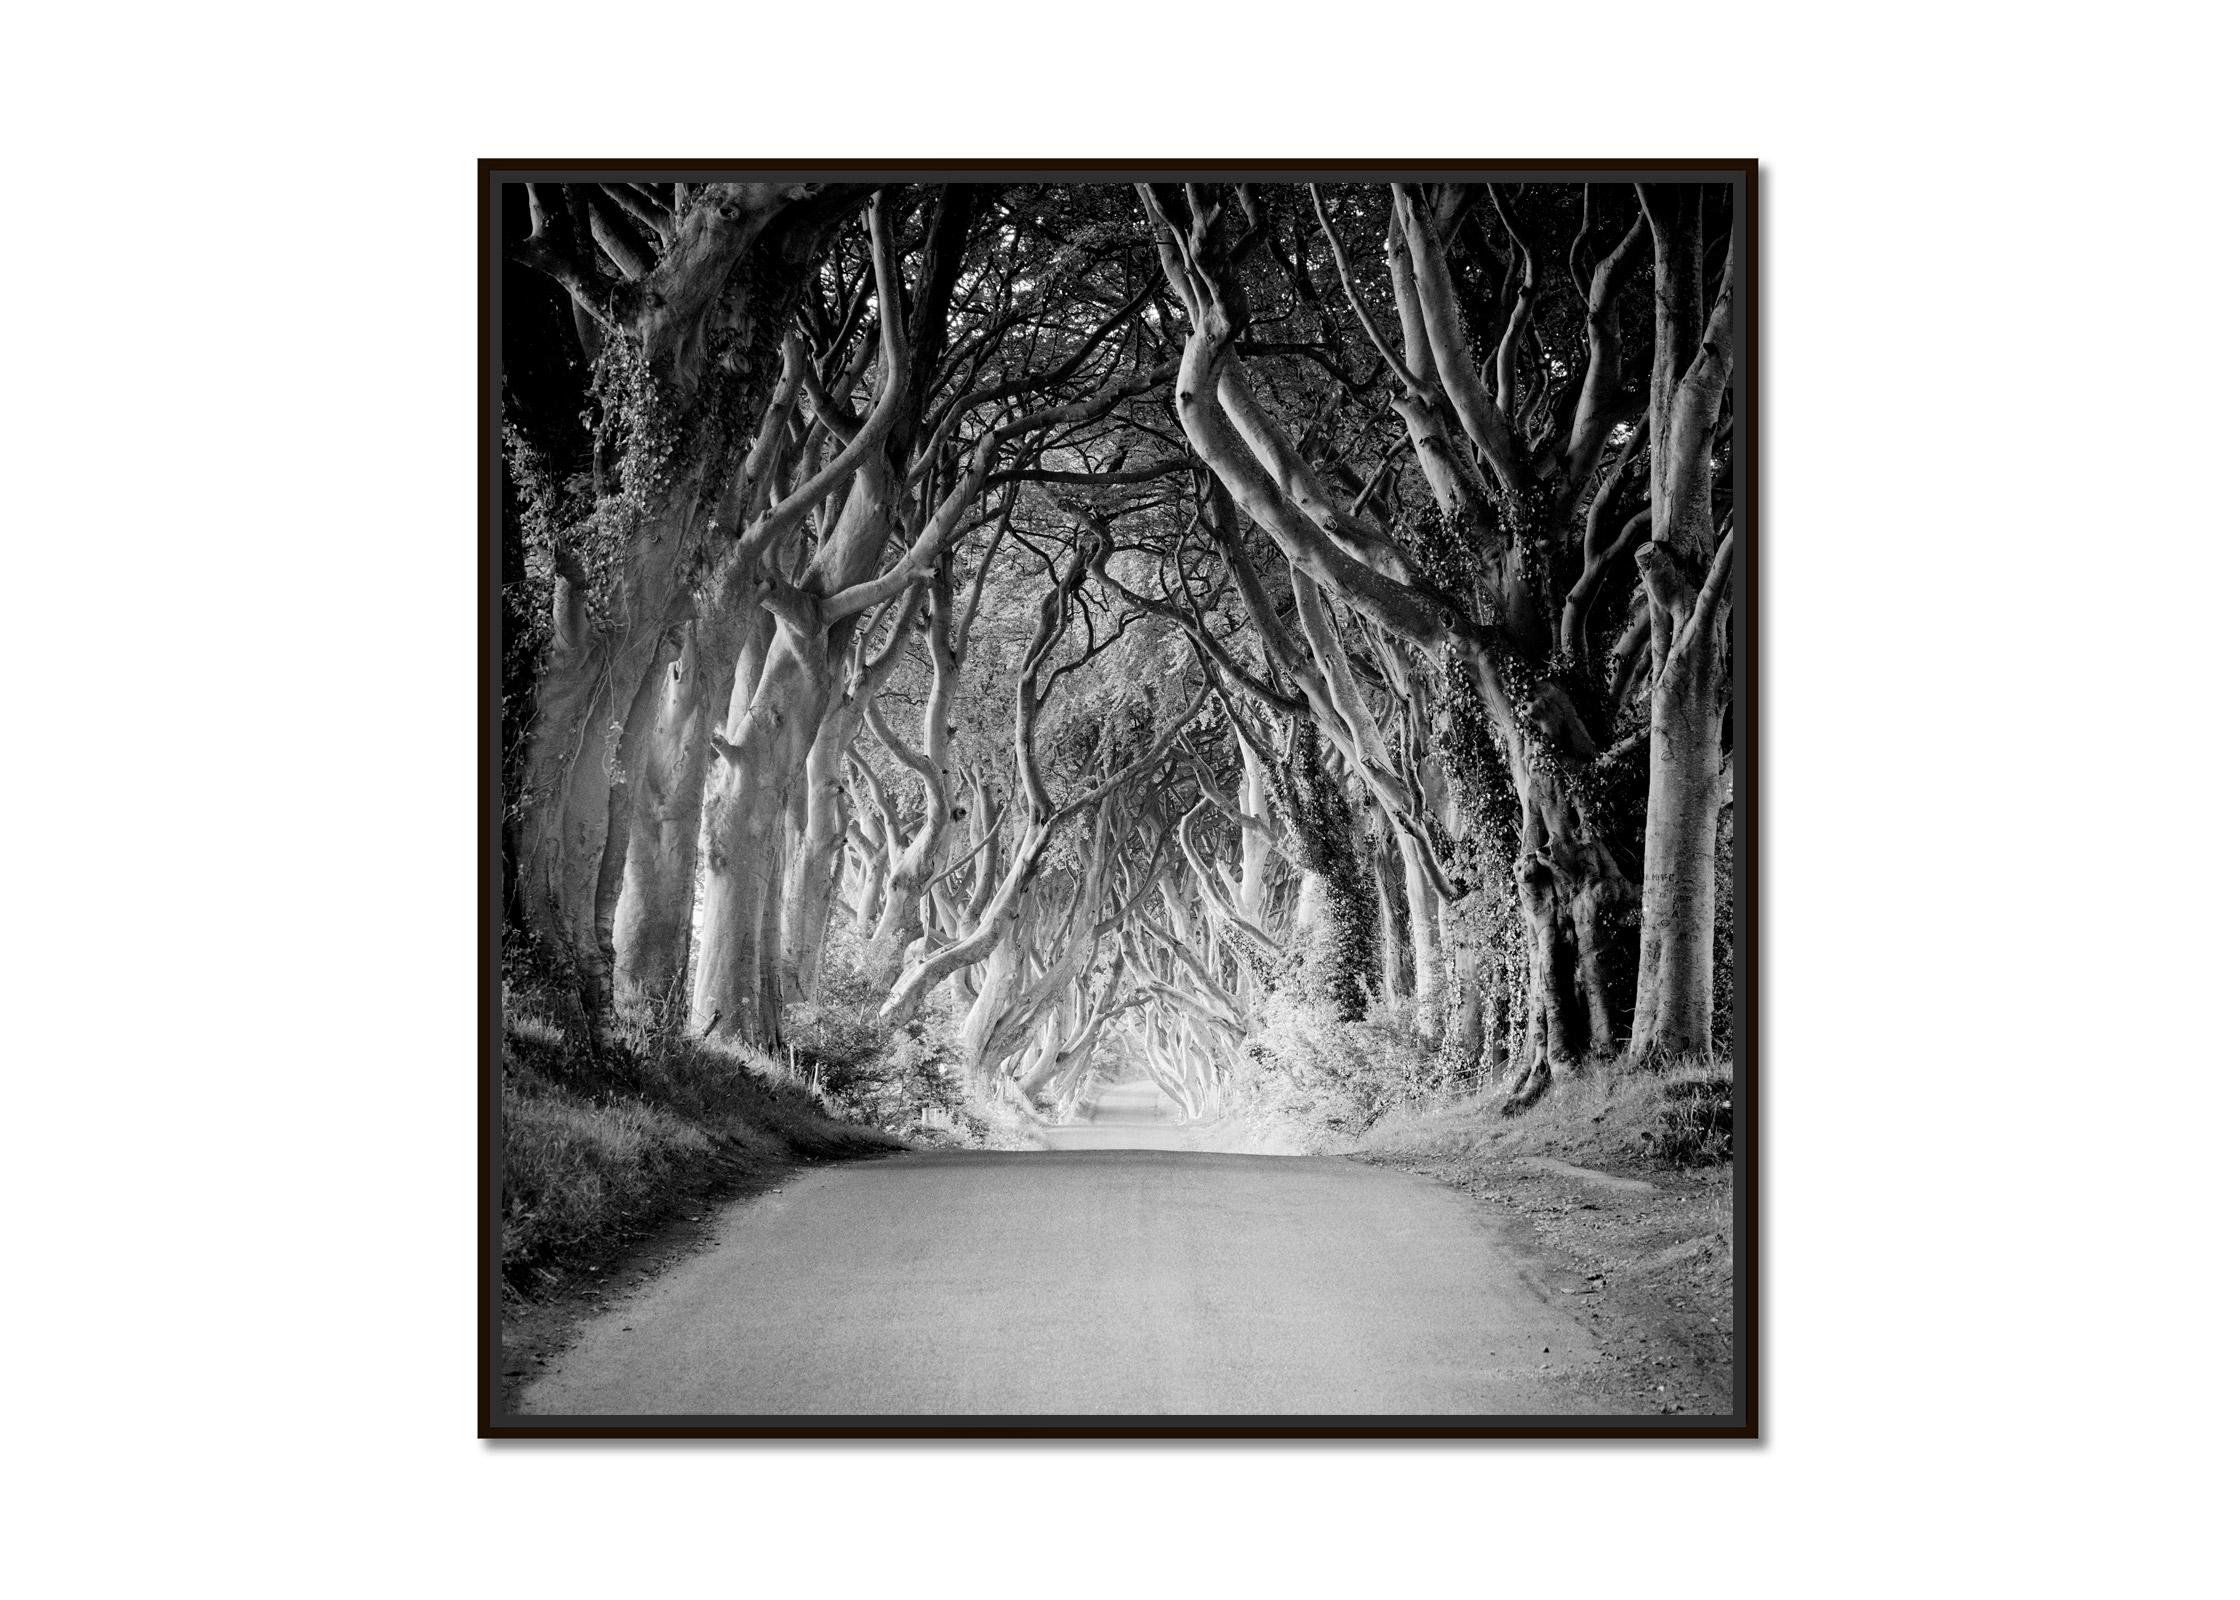 Dark Hedges, Ireland, Tree Avenue, black and white art landscape photography - Photograph by Gerald Berghammer